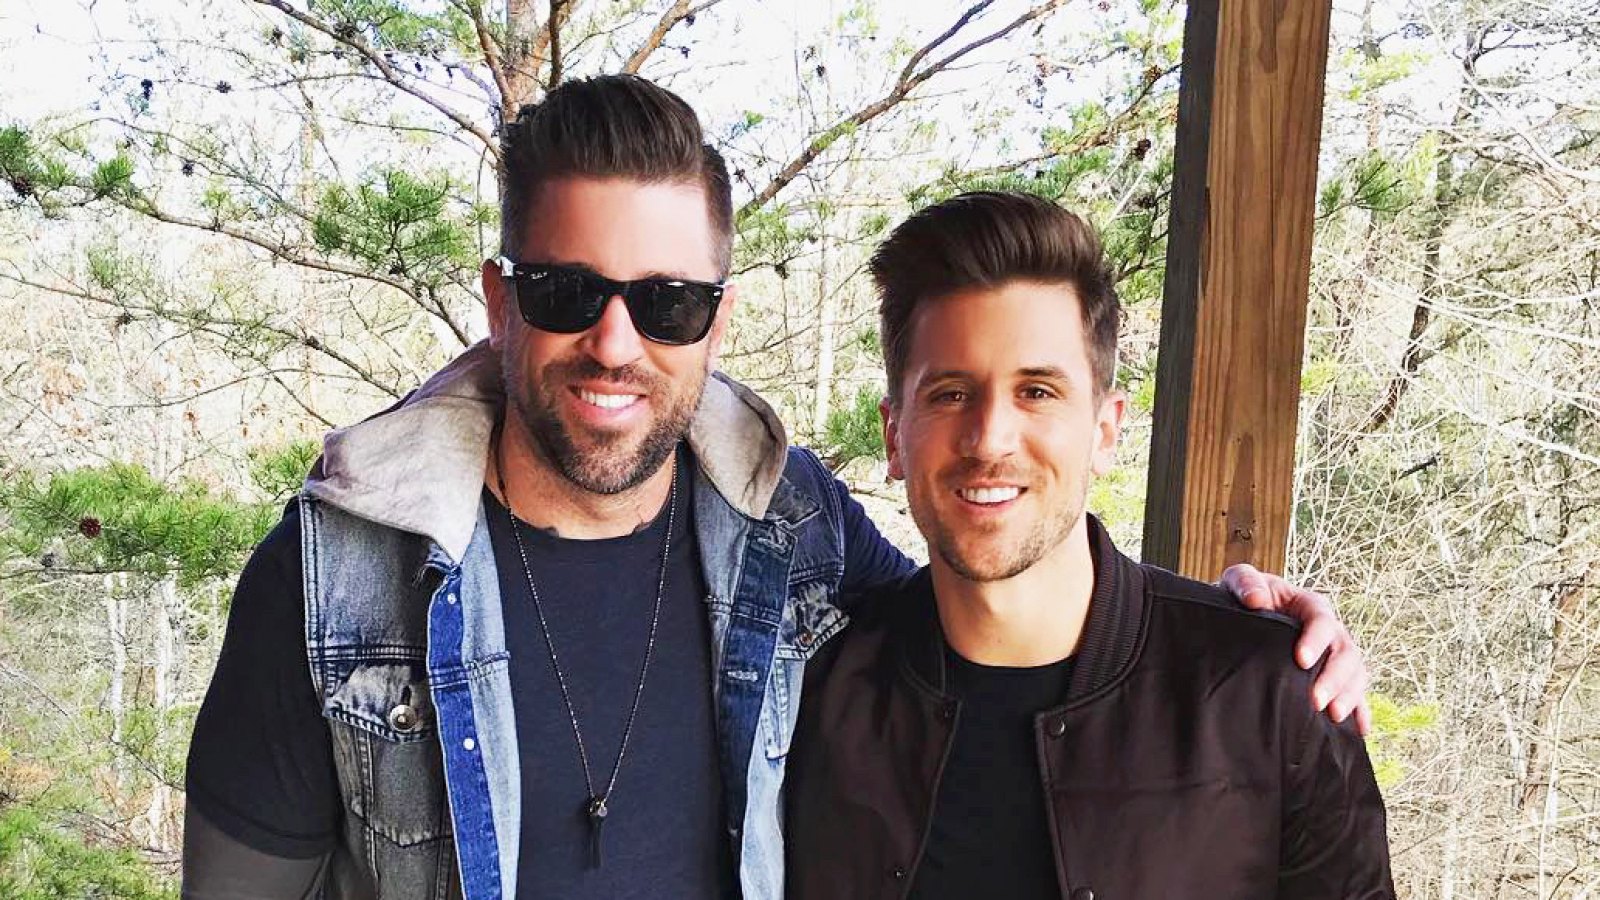 Jordan Rodgers and brother Luke Rodgers